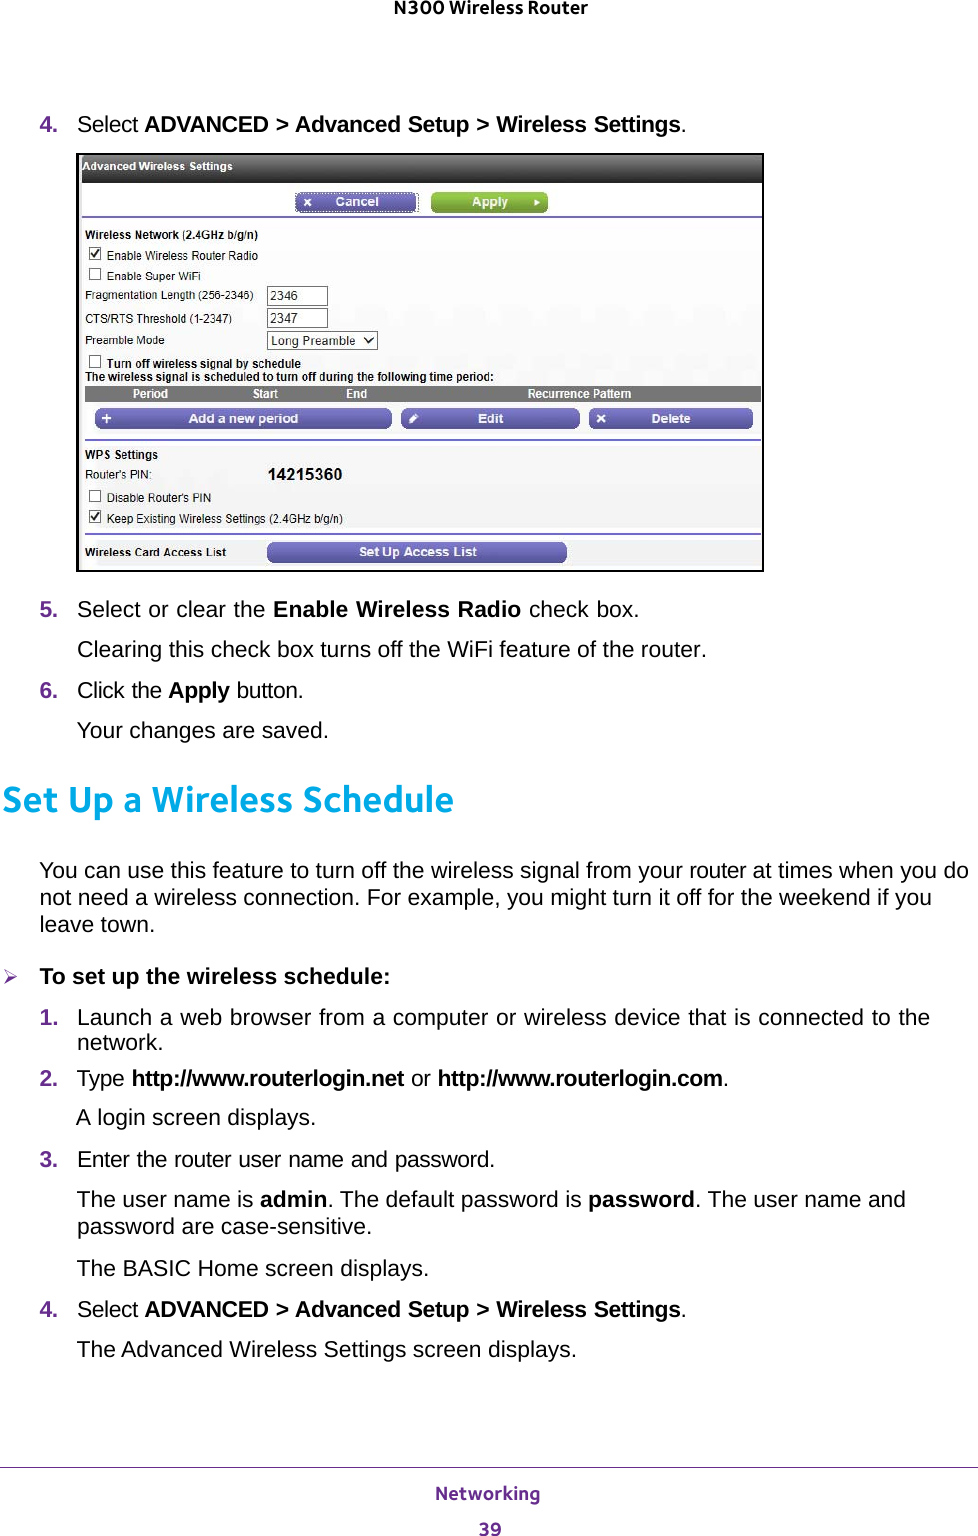 Networking 39 N300 Wireless Router4.  Select ADVANCED &gt; Advanced Setup &gt; Wireless Settings.5.  Select or clear the Enable Wireless Radio check box.Clearing this check box turns off the WiFi feature of the router. 6.  Click the Apply button.Your changes are saved.Set Up a Wireless ScheduleYou can use this feature to turn off the wireless signal from your router at times when you do not need a wireless connection. For example, you might turn it off for the weekend if you leave town.To set up the wireless schedule:1.  Launch a web browser from a computer or wireless device that is connected to the network.2.  Type http://www.routerlogin.net or http://www.routerlogin.com.A login screen displays.3.  Enter the router user name and password.The user name is admin. The default password is password. The user name and password are case-sensitive.The BASIC Home screen displays.4.  Select ADVANCED &gt; Advanced Setup &gt; Wireless Settings.The Advanced Wireless Settings screen displays.